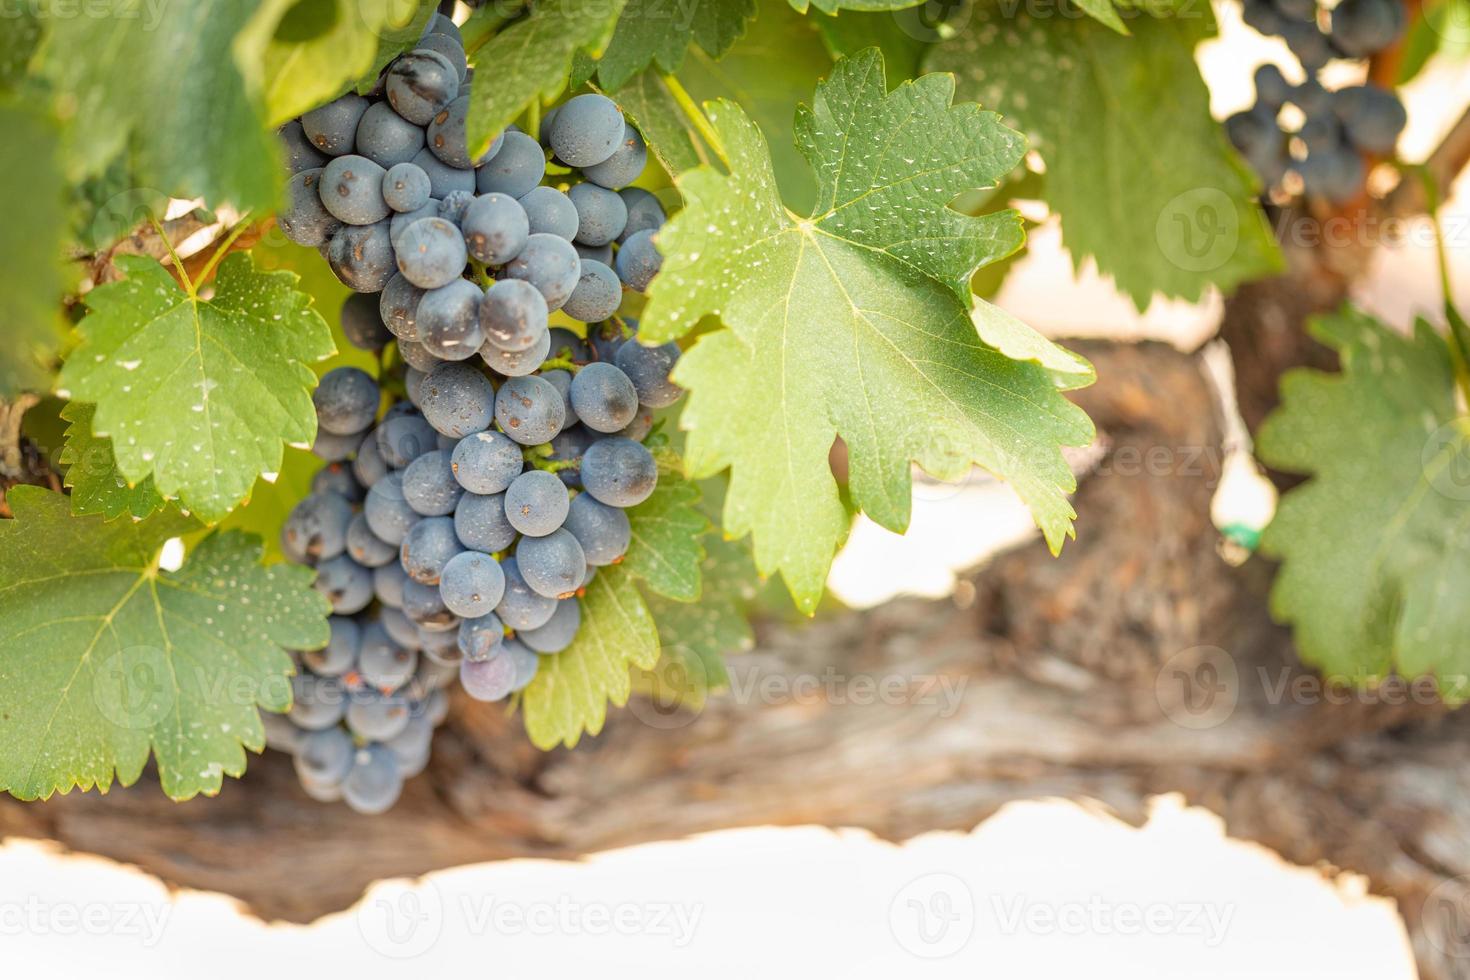 Vineyard with Lush, Ripe Wine Grapes on the Vine Ready for Harvest photo